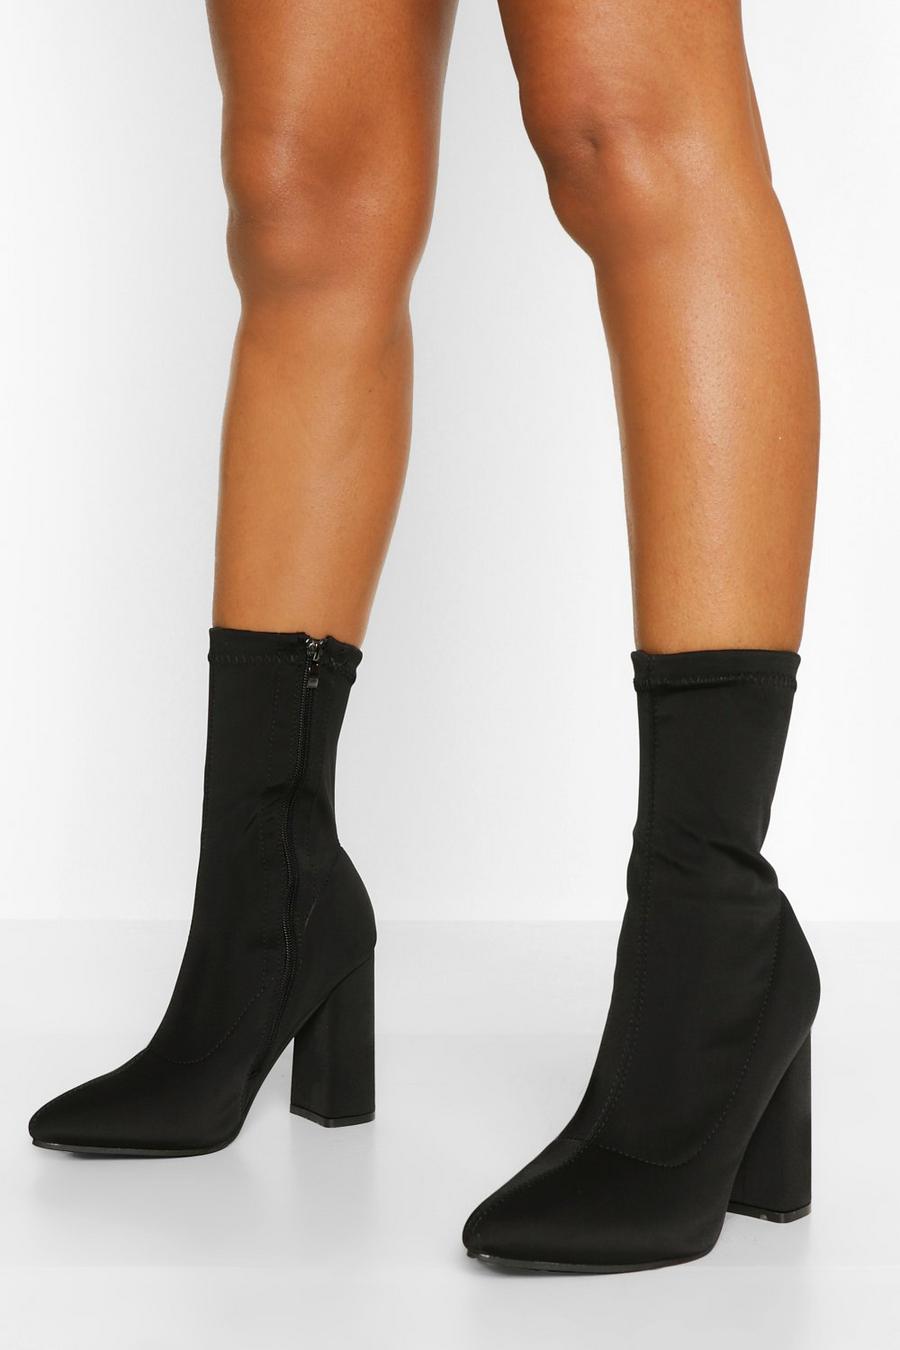 Black nero Wide Fit Block Heel Pointed Toe Sock Boots image number 1